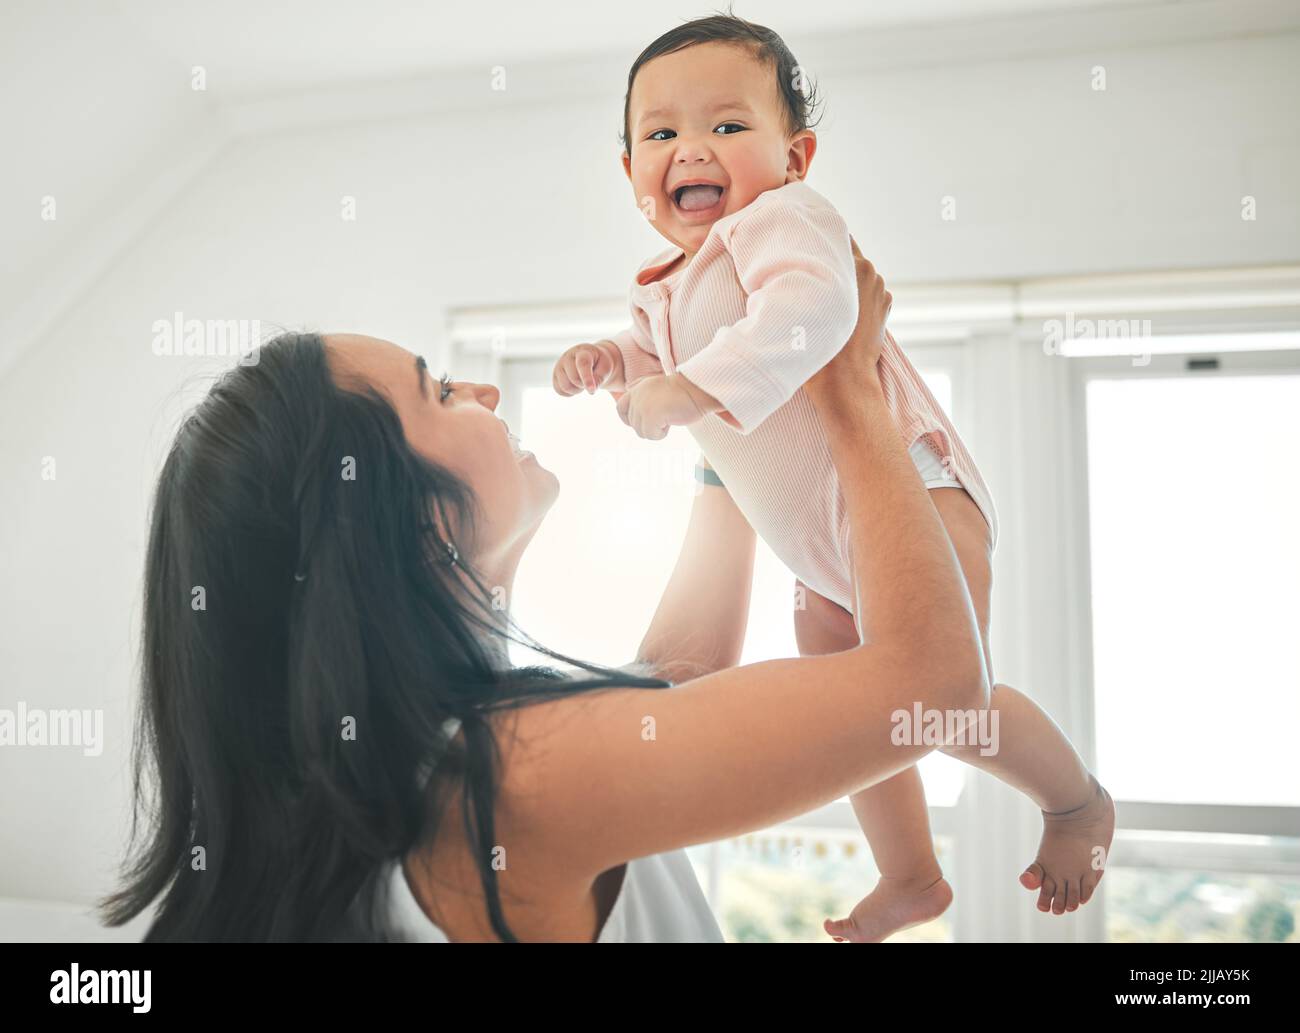 Youve given me even more reason to smile. an attractive young woman and her newborn baby at home. Stock Photo